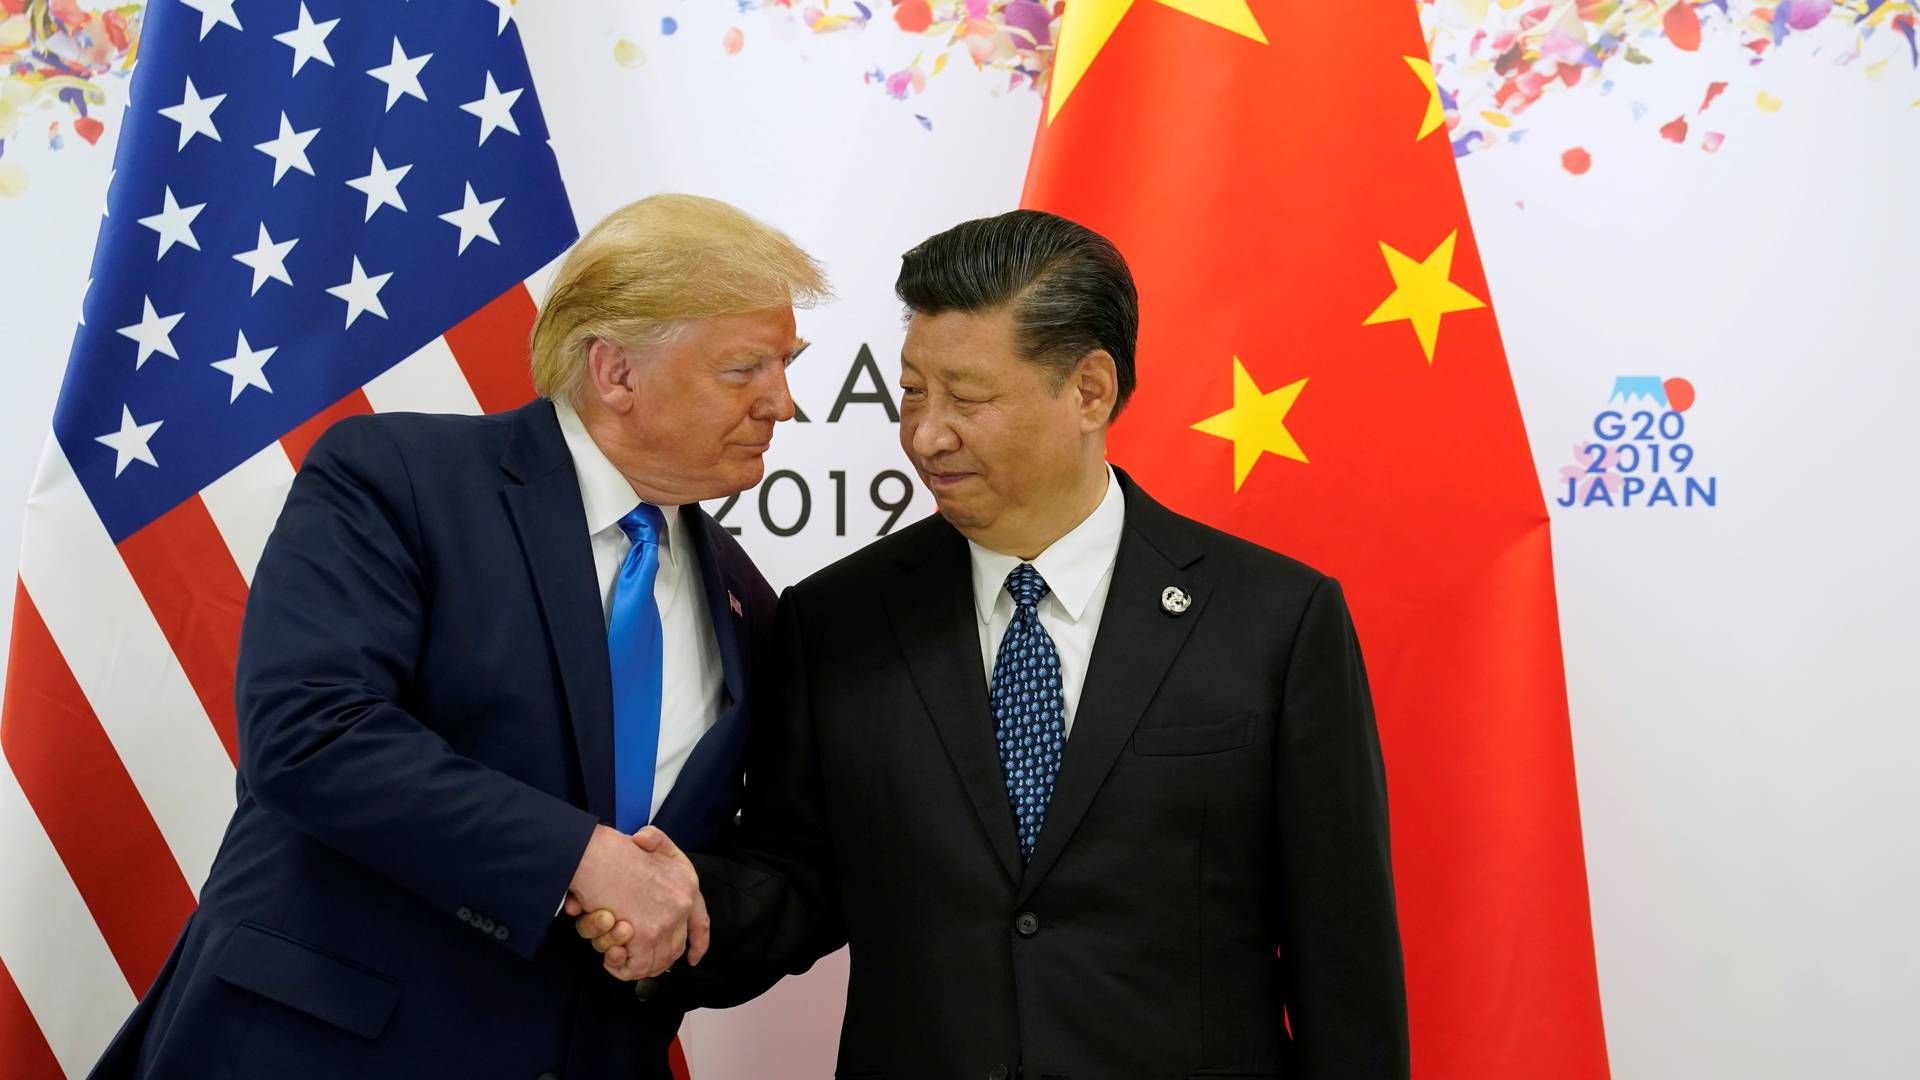 U.S. President Donald Trump shakes hands with China's President Xi Jinping before starting their bilateral meeting during the G20 leaders summit in Japan, June 29th. | Photo: Kevin Lamarque/REUTERS / X00157